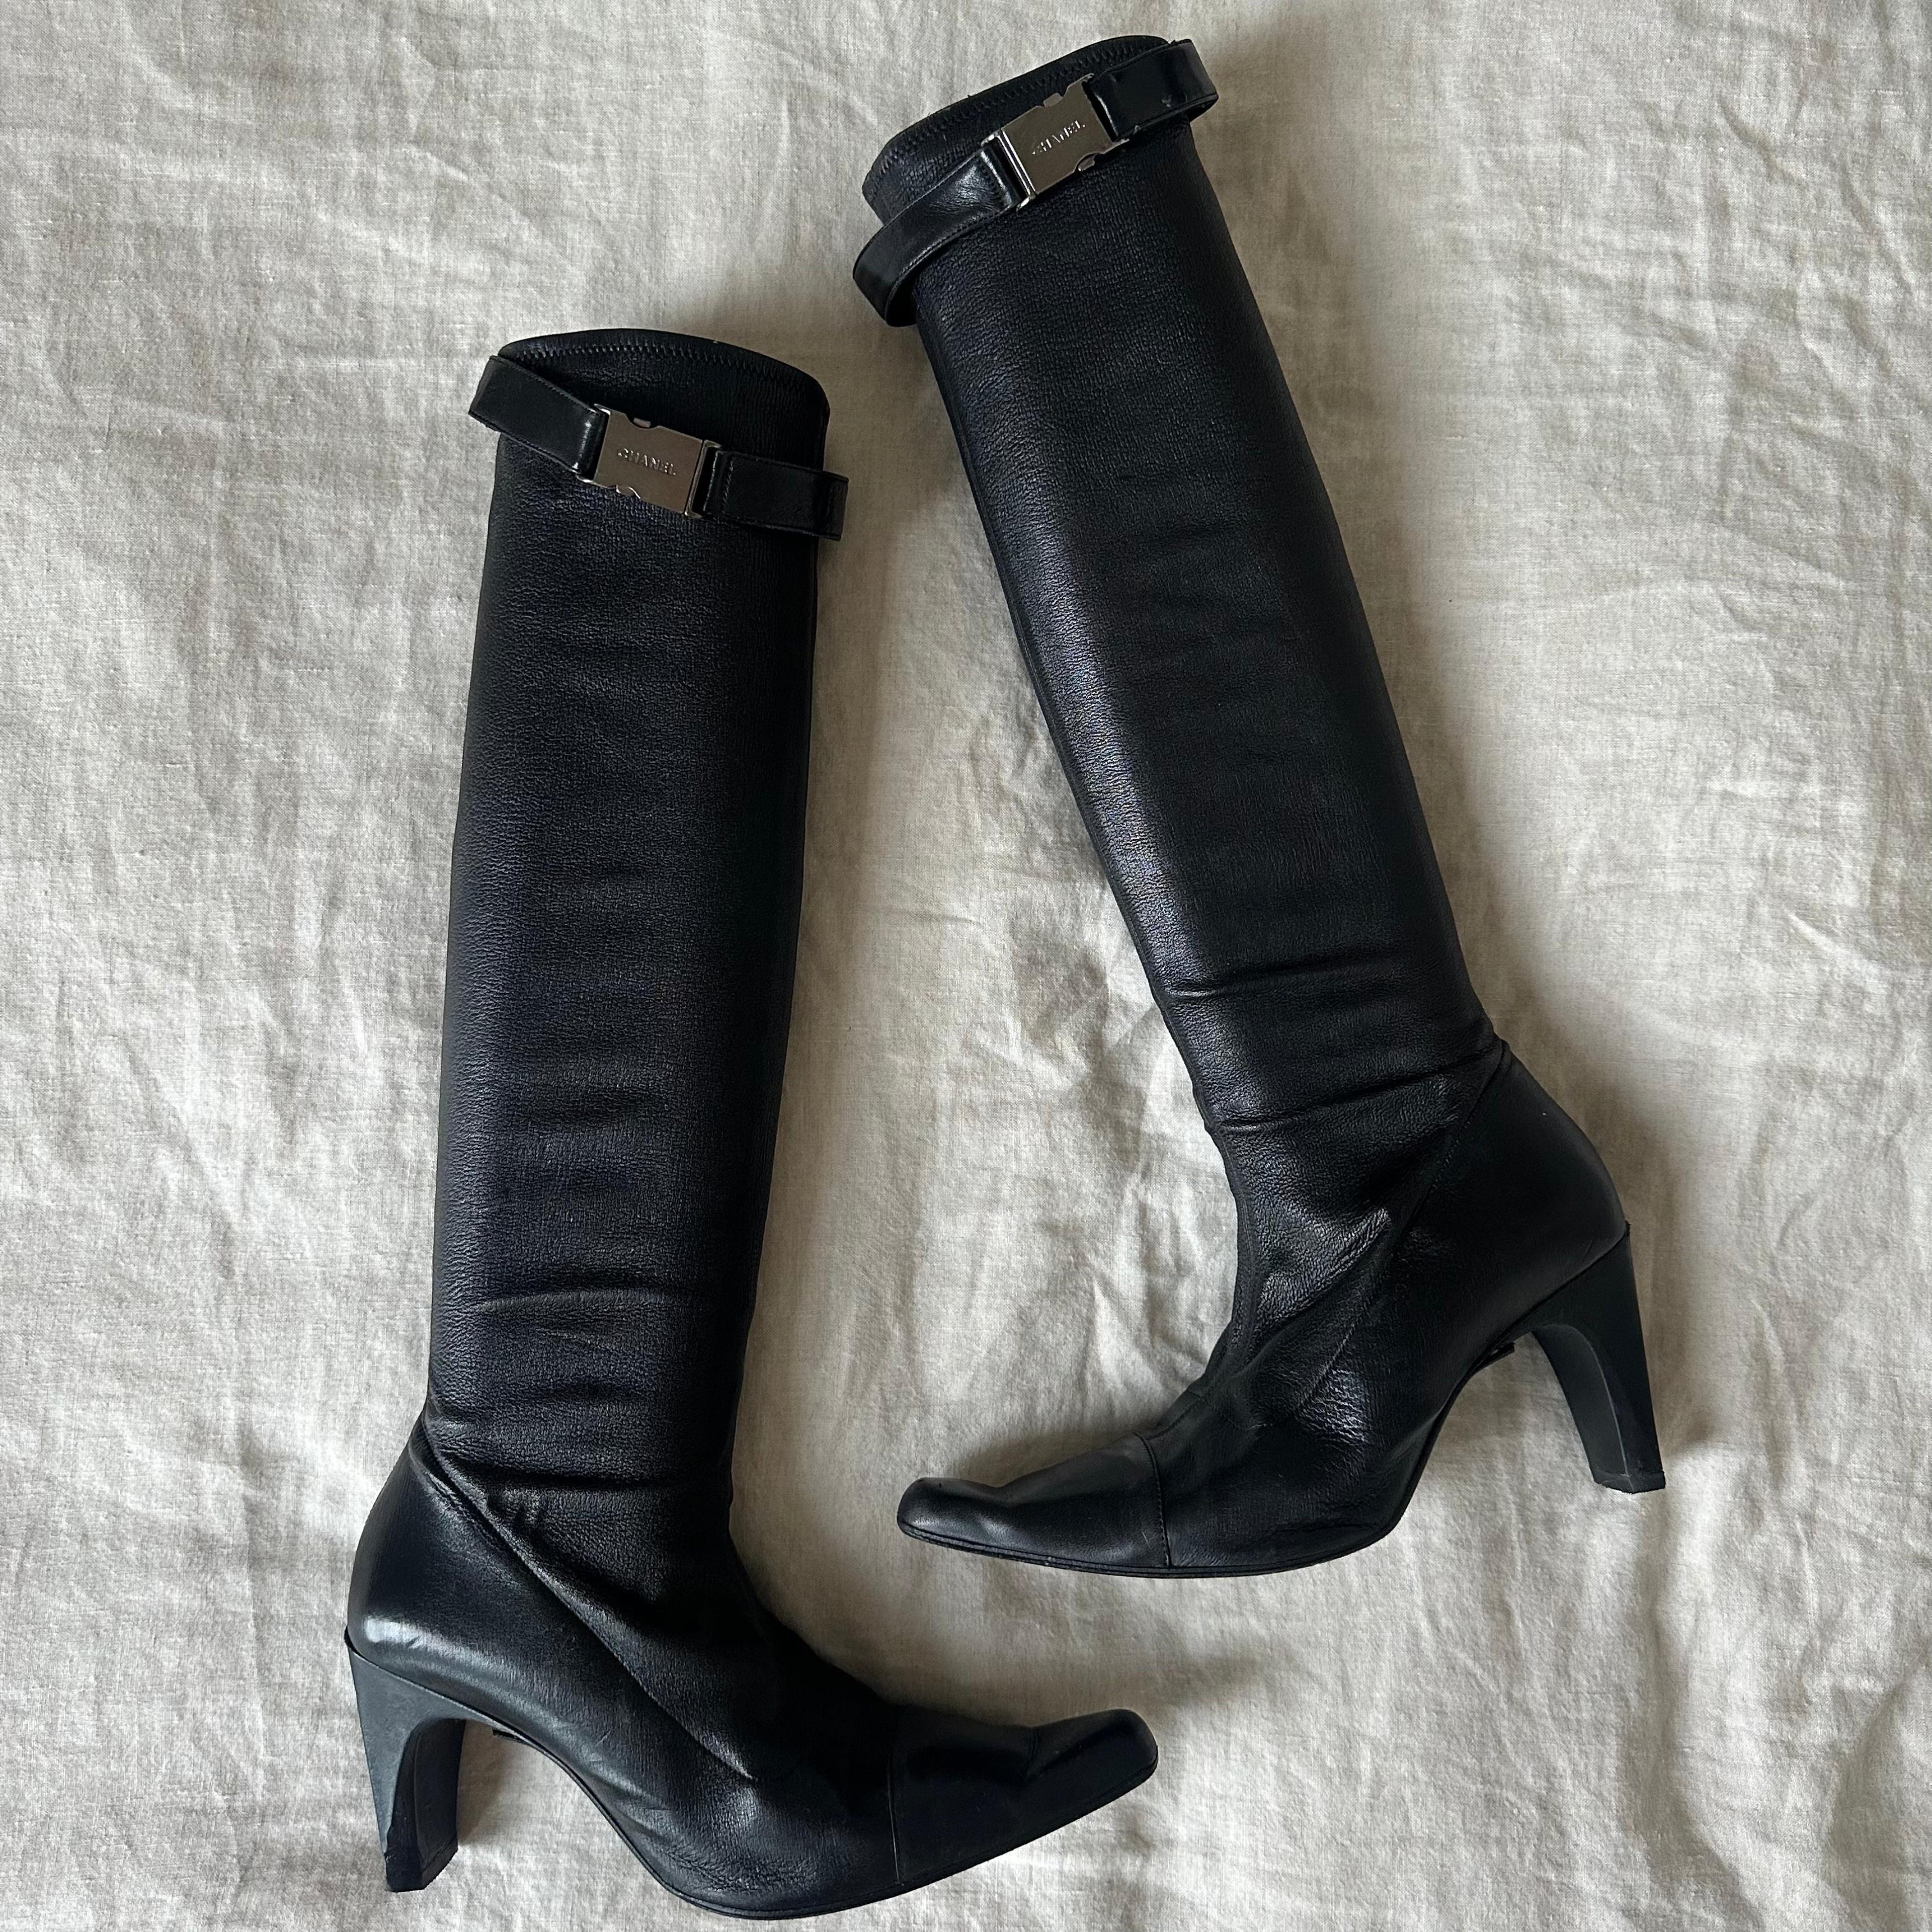 Chanel Buckle Boots in Black Size 39